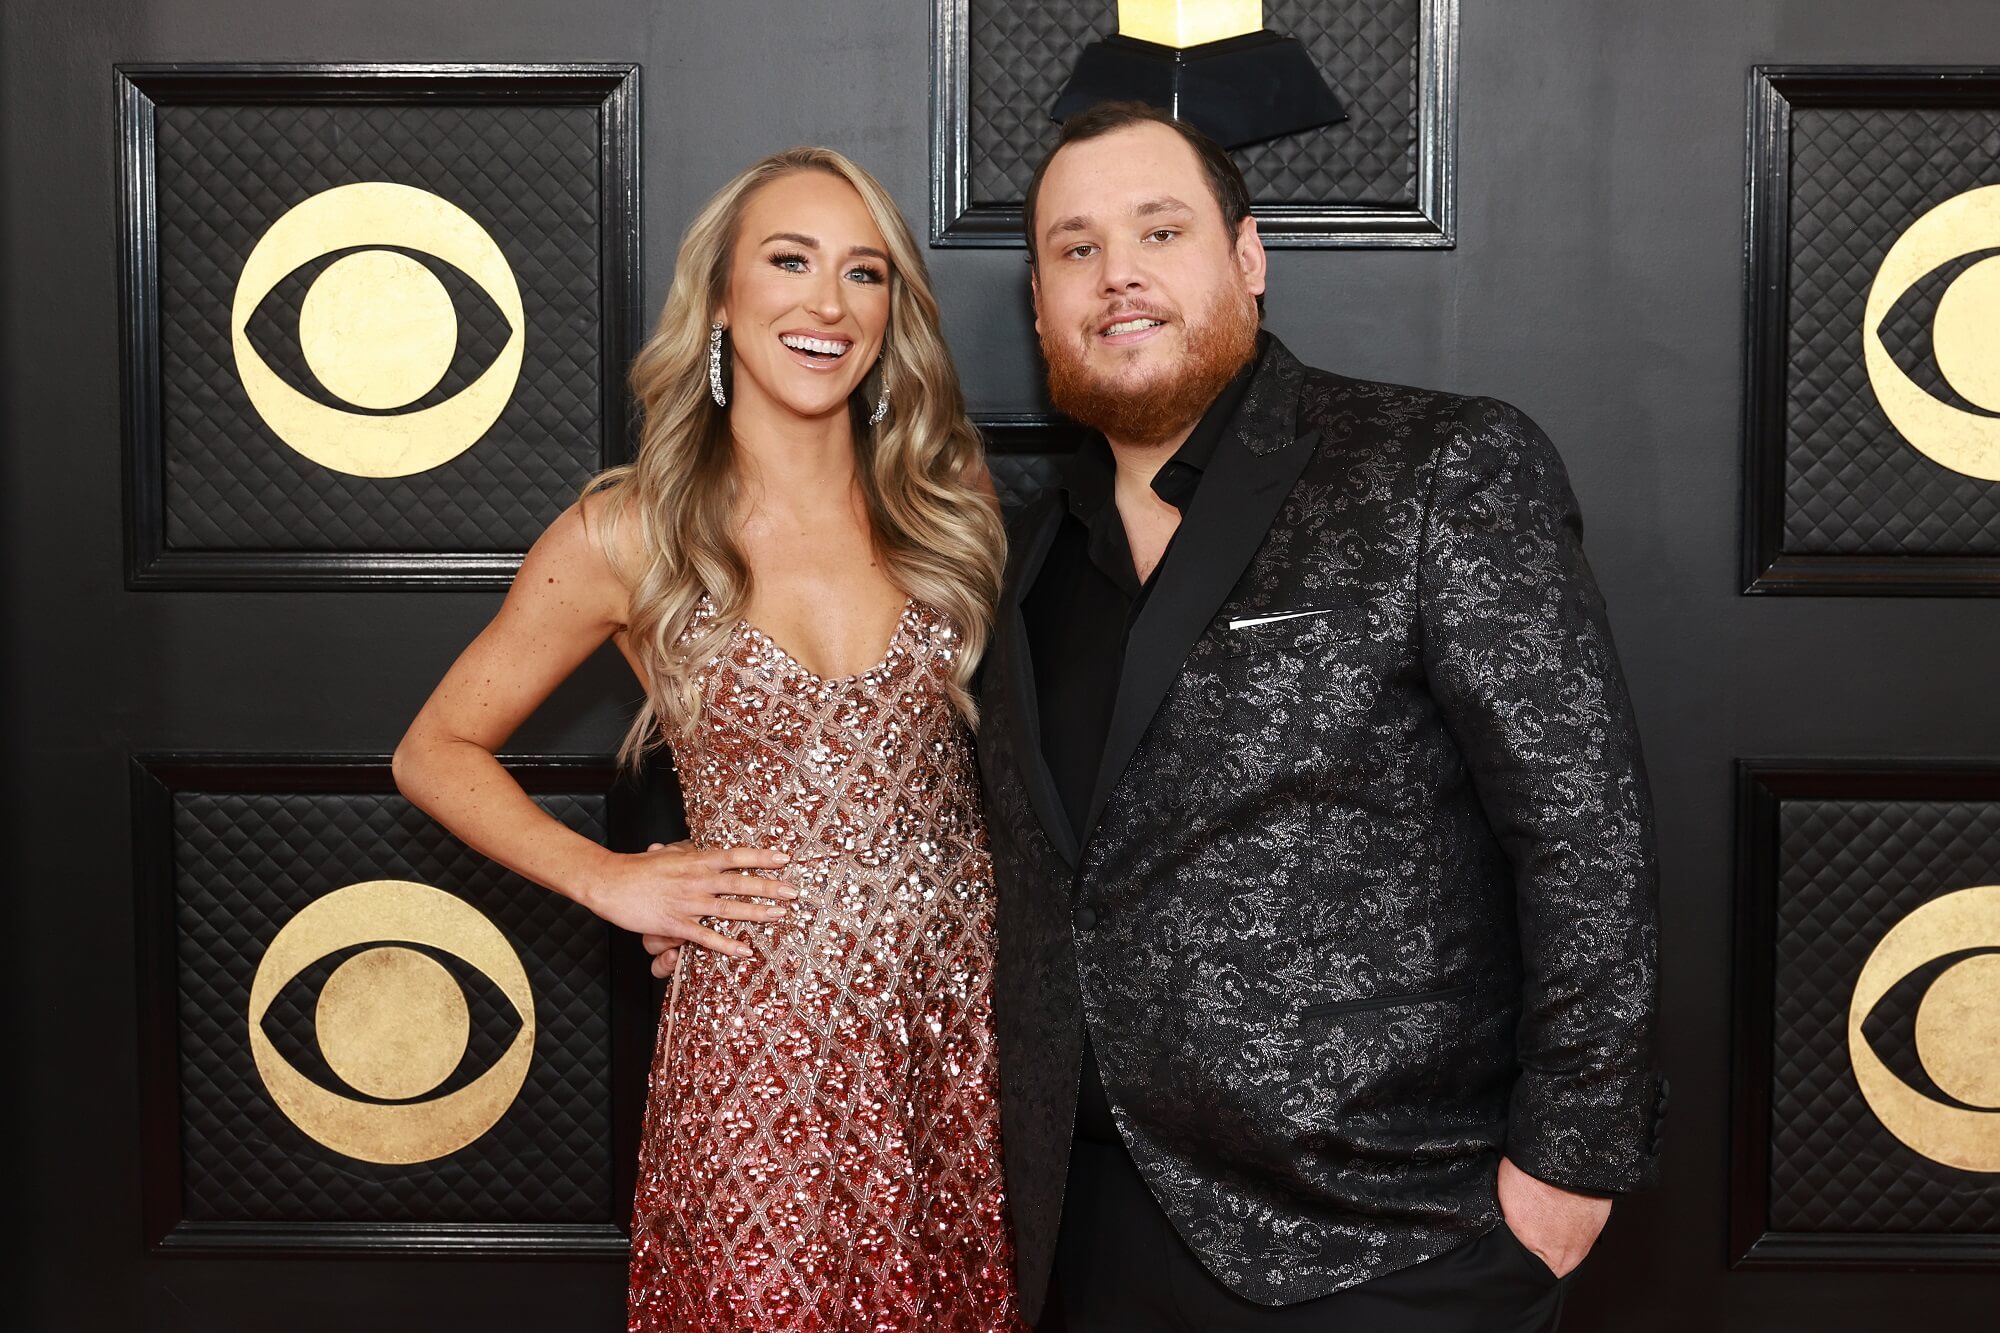 Nicole Hocking in a pink bedazzled dress with Luke Combs in a black suit